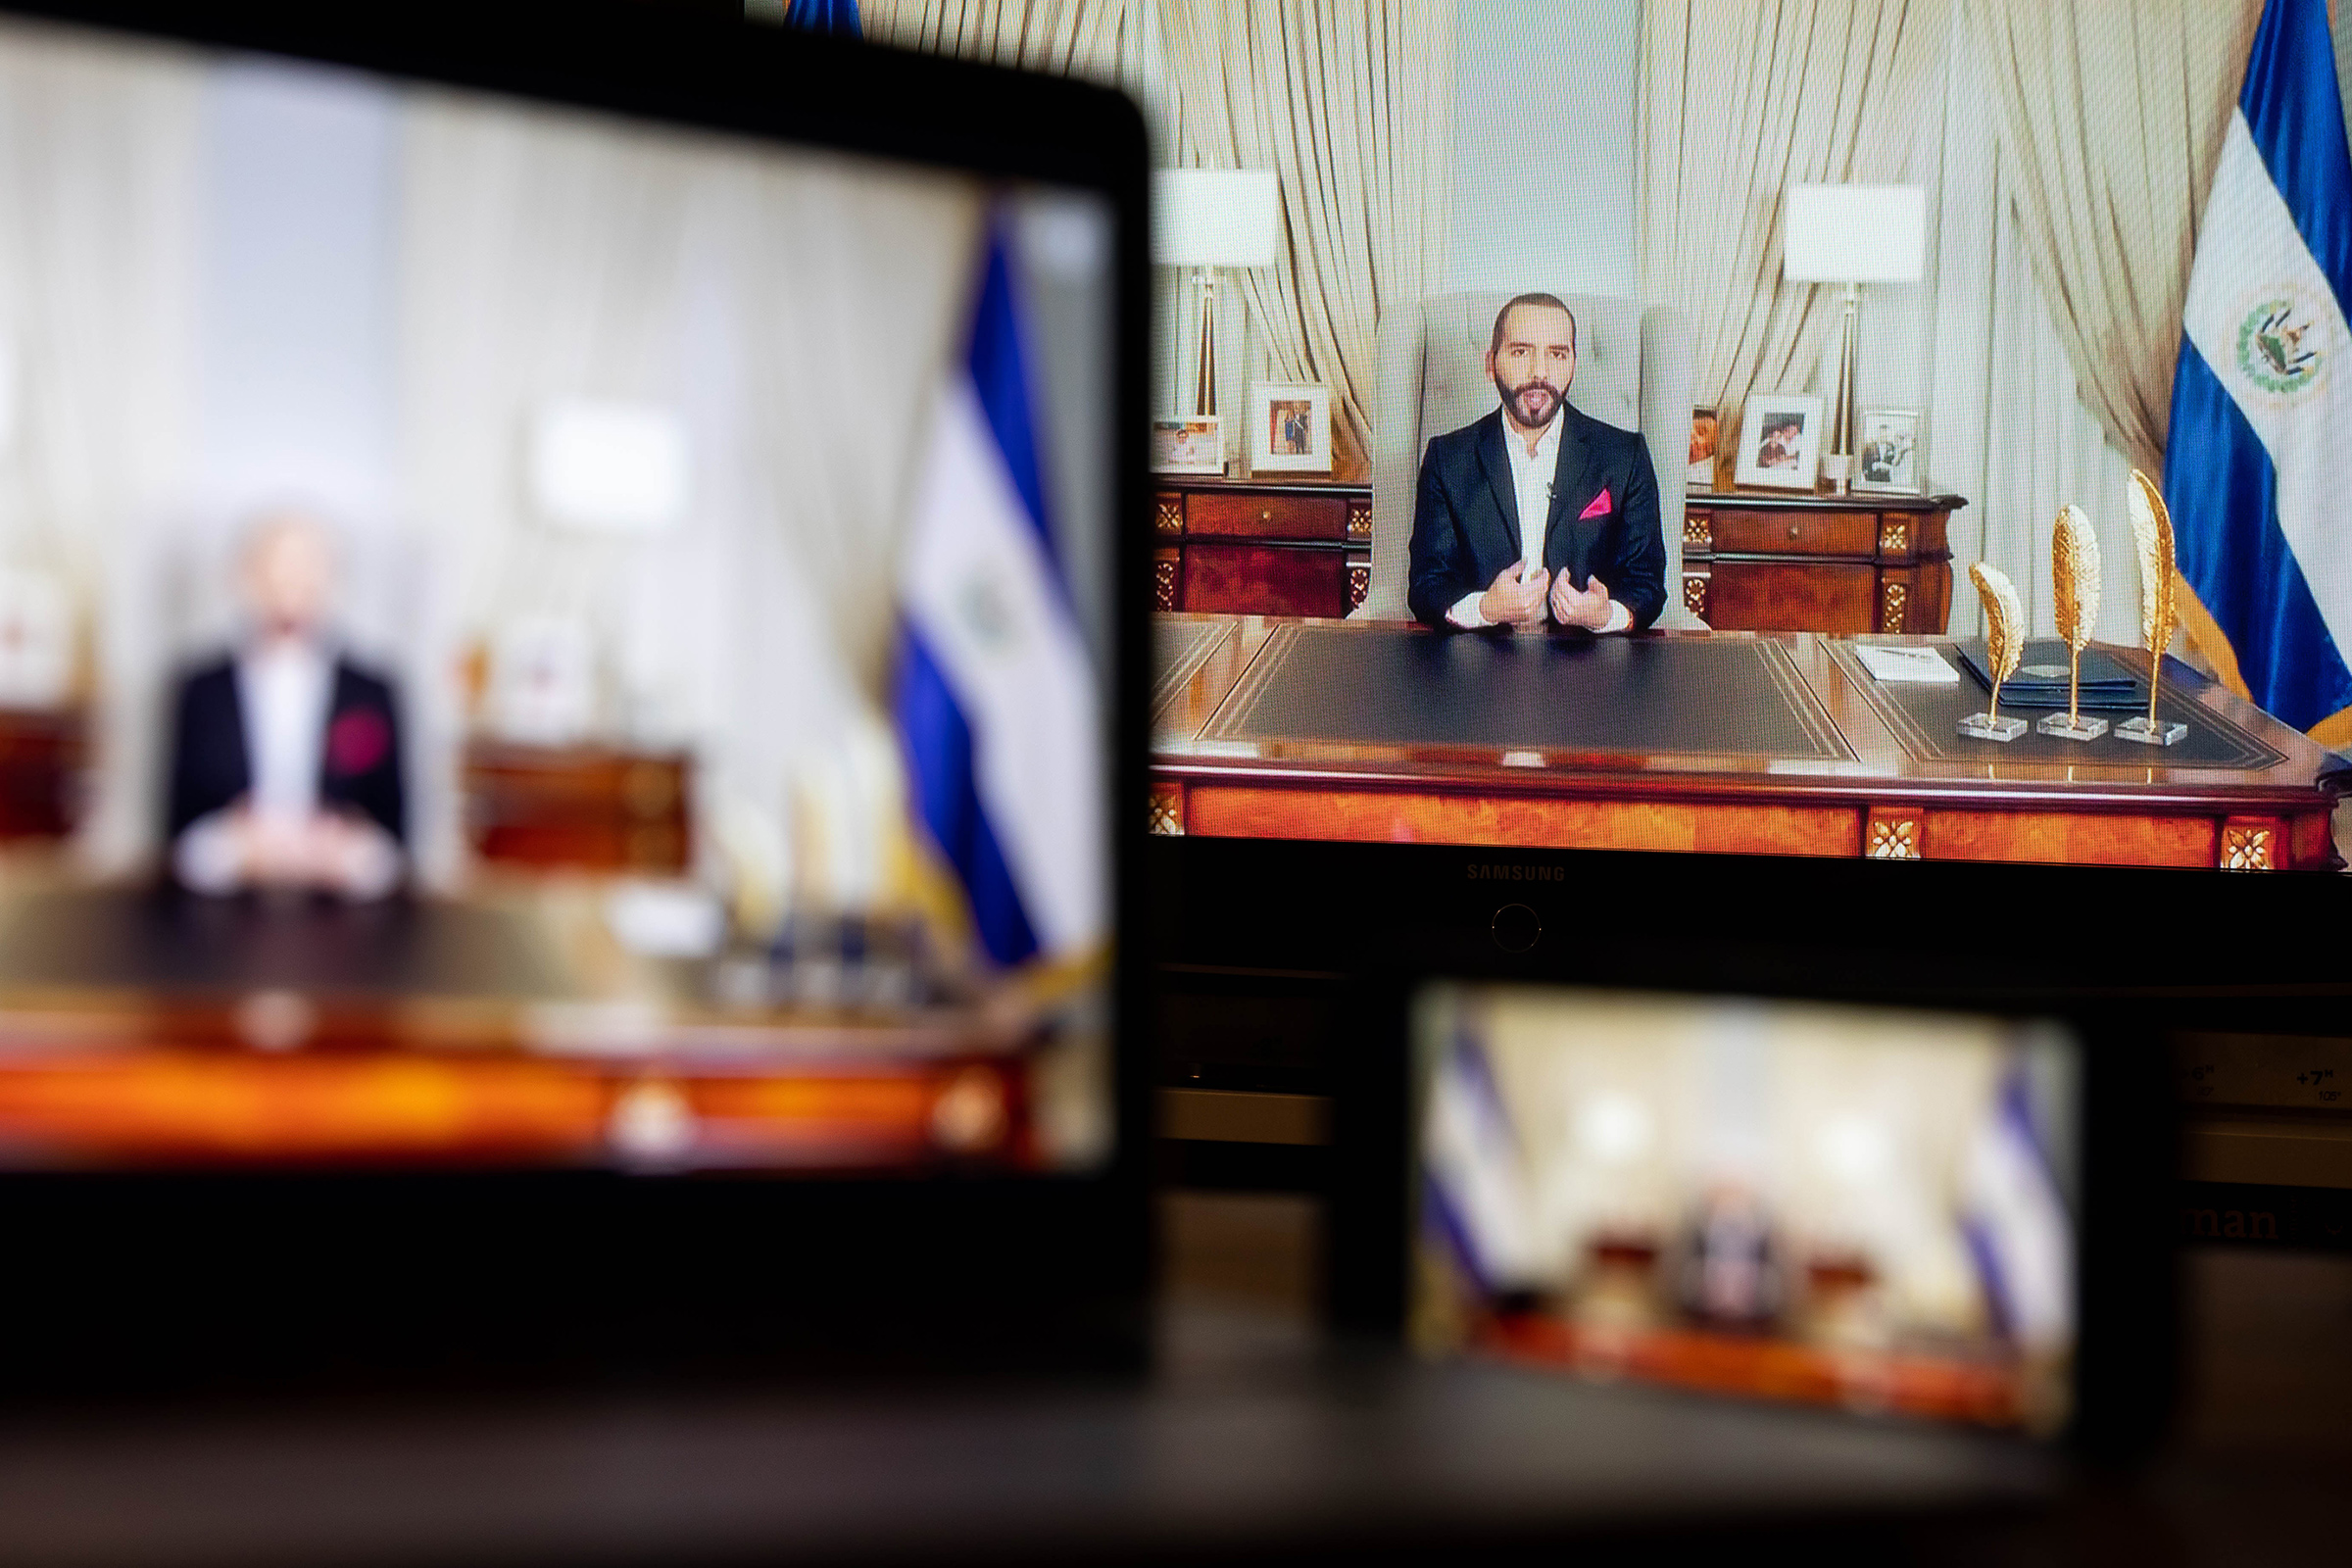 Nayib Bukele, El Salvador's president, speaks in a prerecorded video during the United Nations General Assembly via live stream in New York on Sept. 23, 2021. (Michael Nagle—Bloomberg/Getty Images)